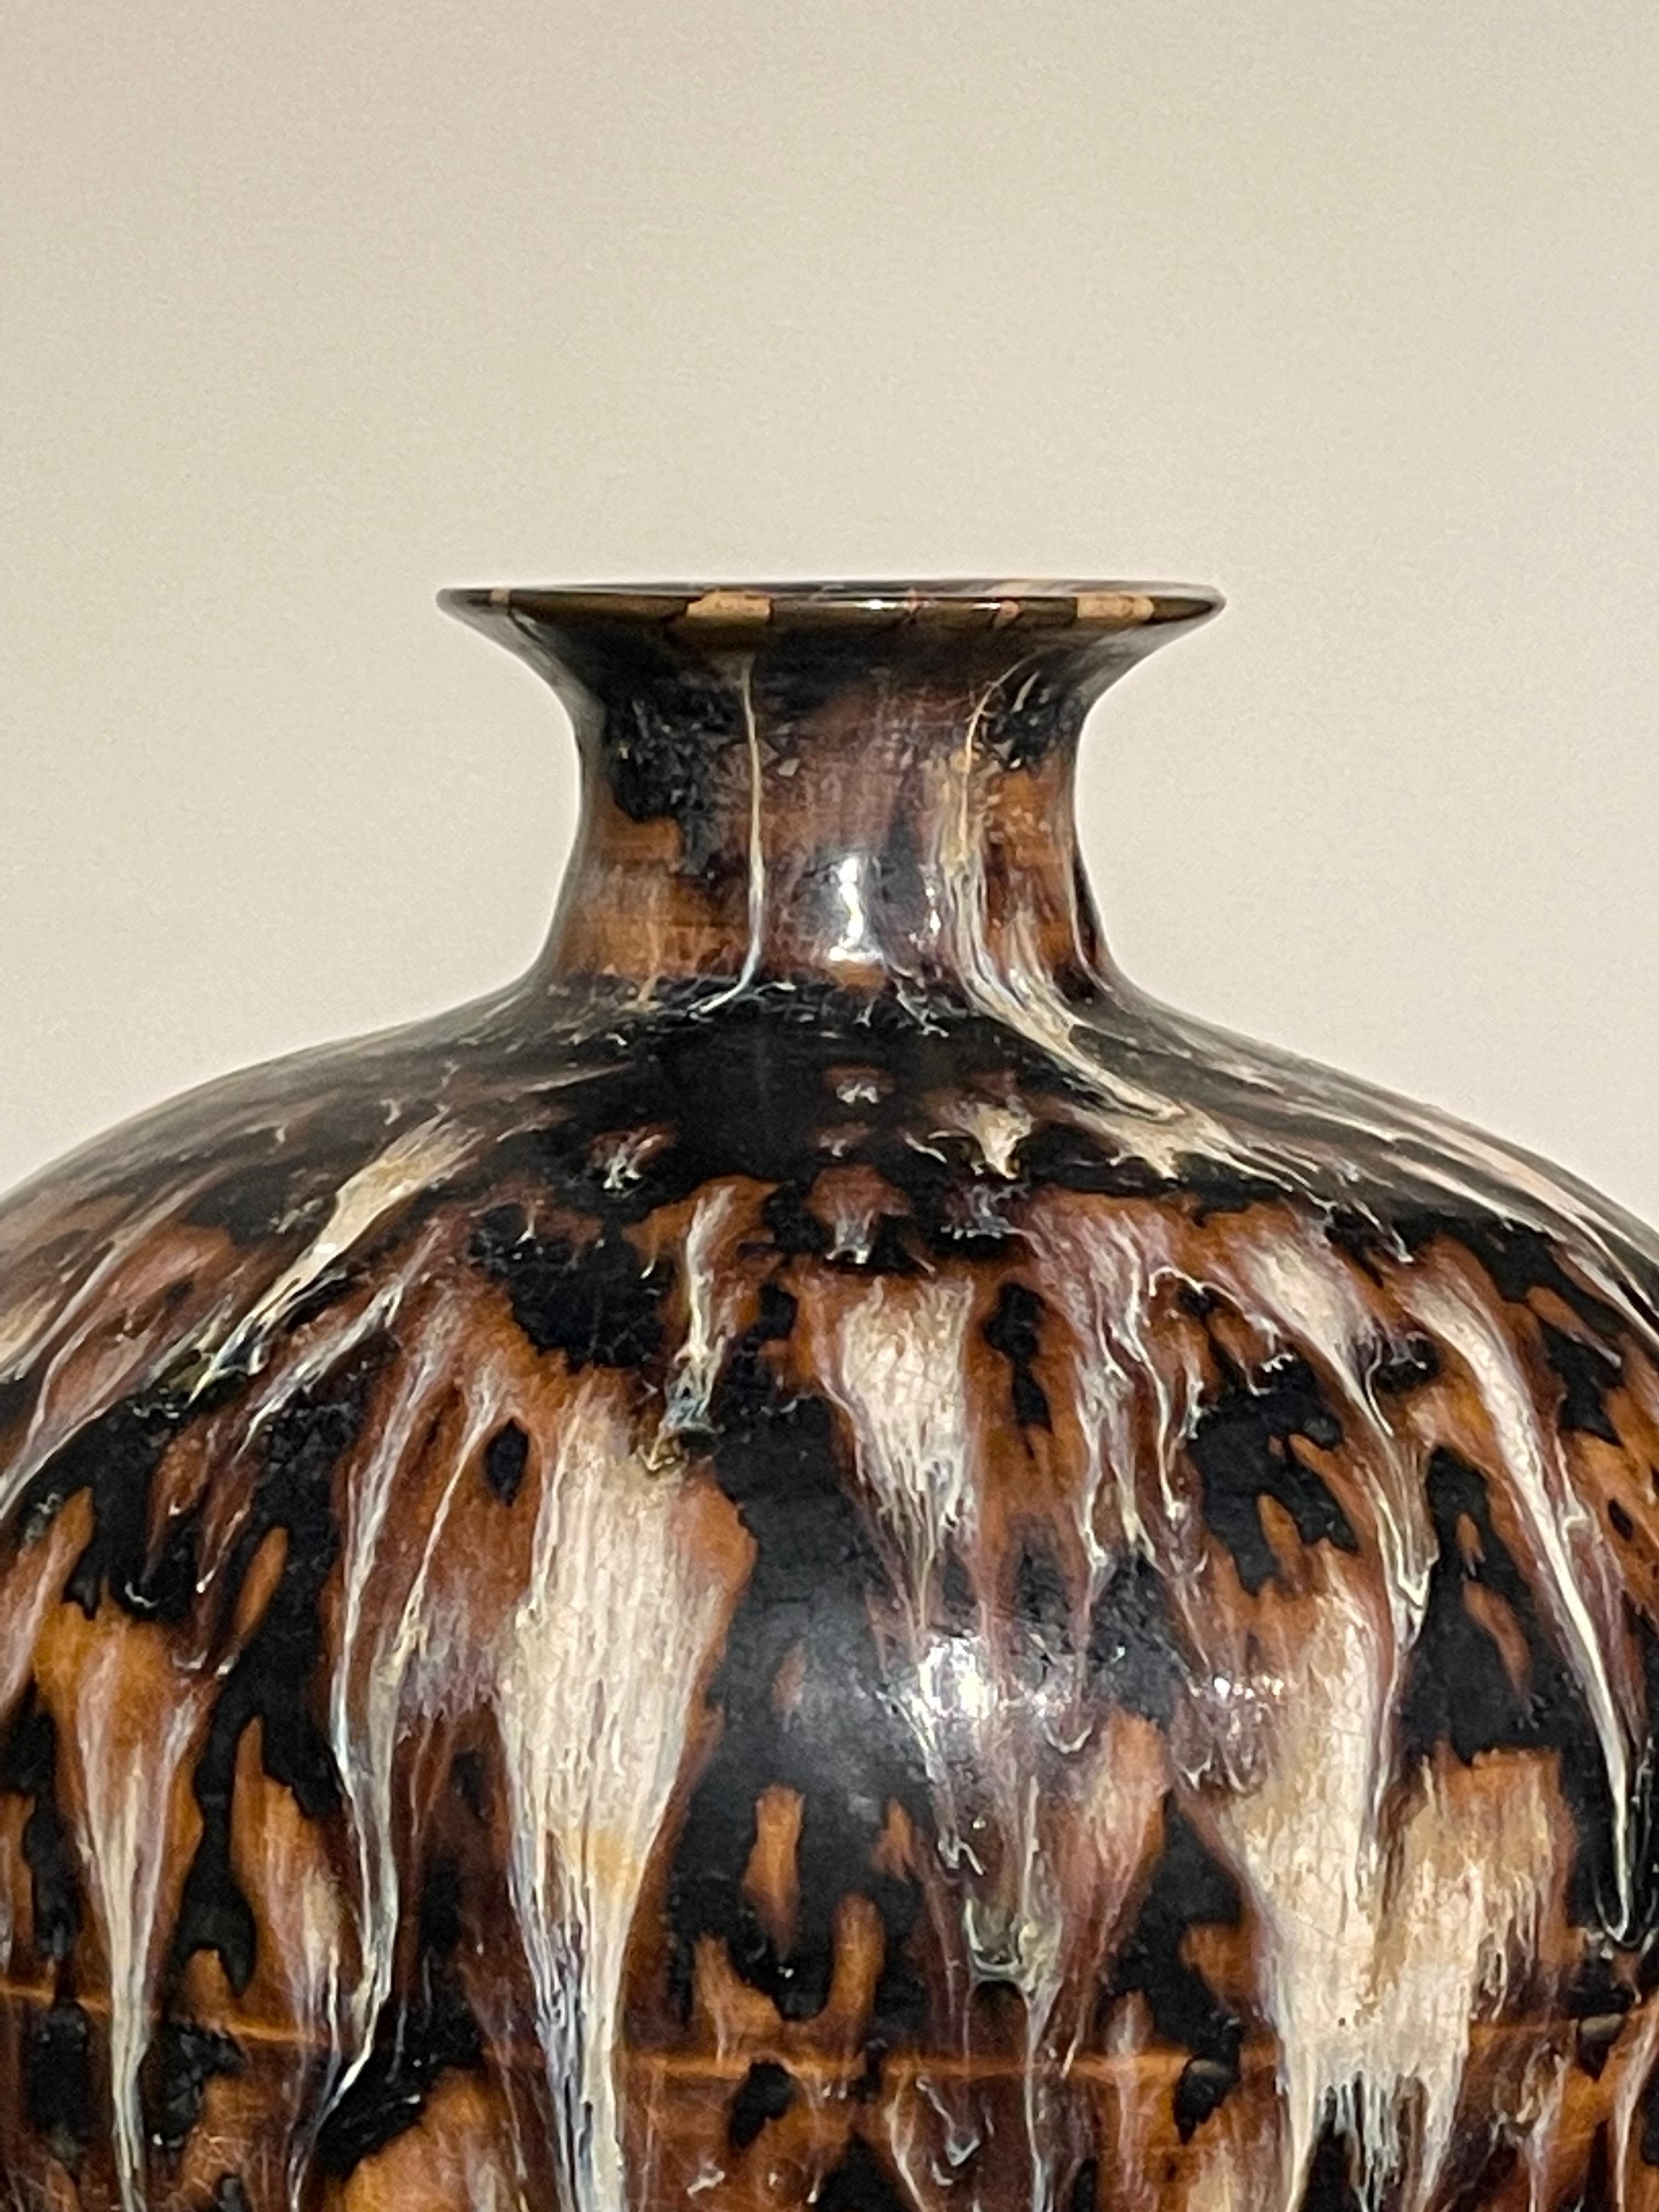 Contemporary Chinese squat shaped vase with tortoise effect glaze.
Black, brown and cream colors.
Two available and sold individually.
Also available in larger, taller style (S6311 )